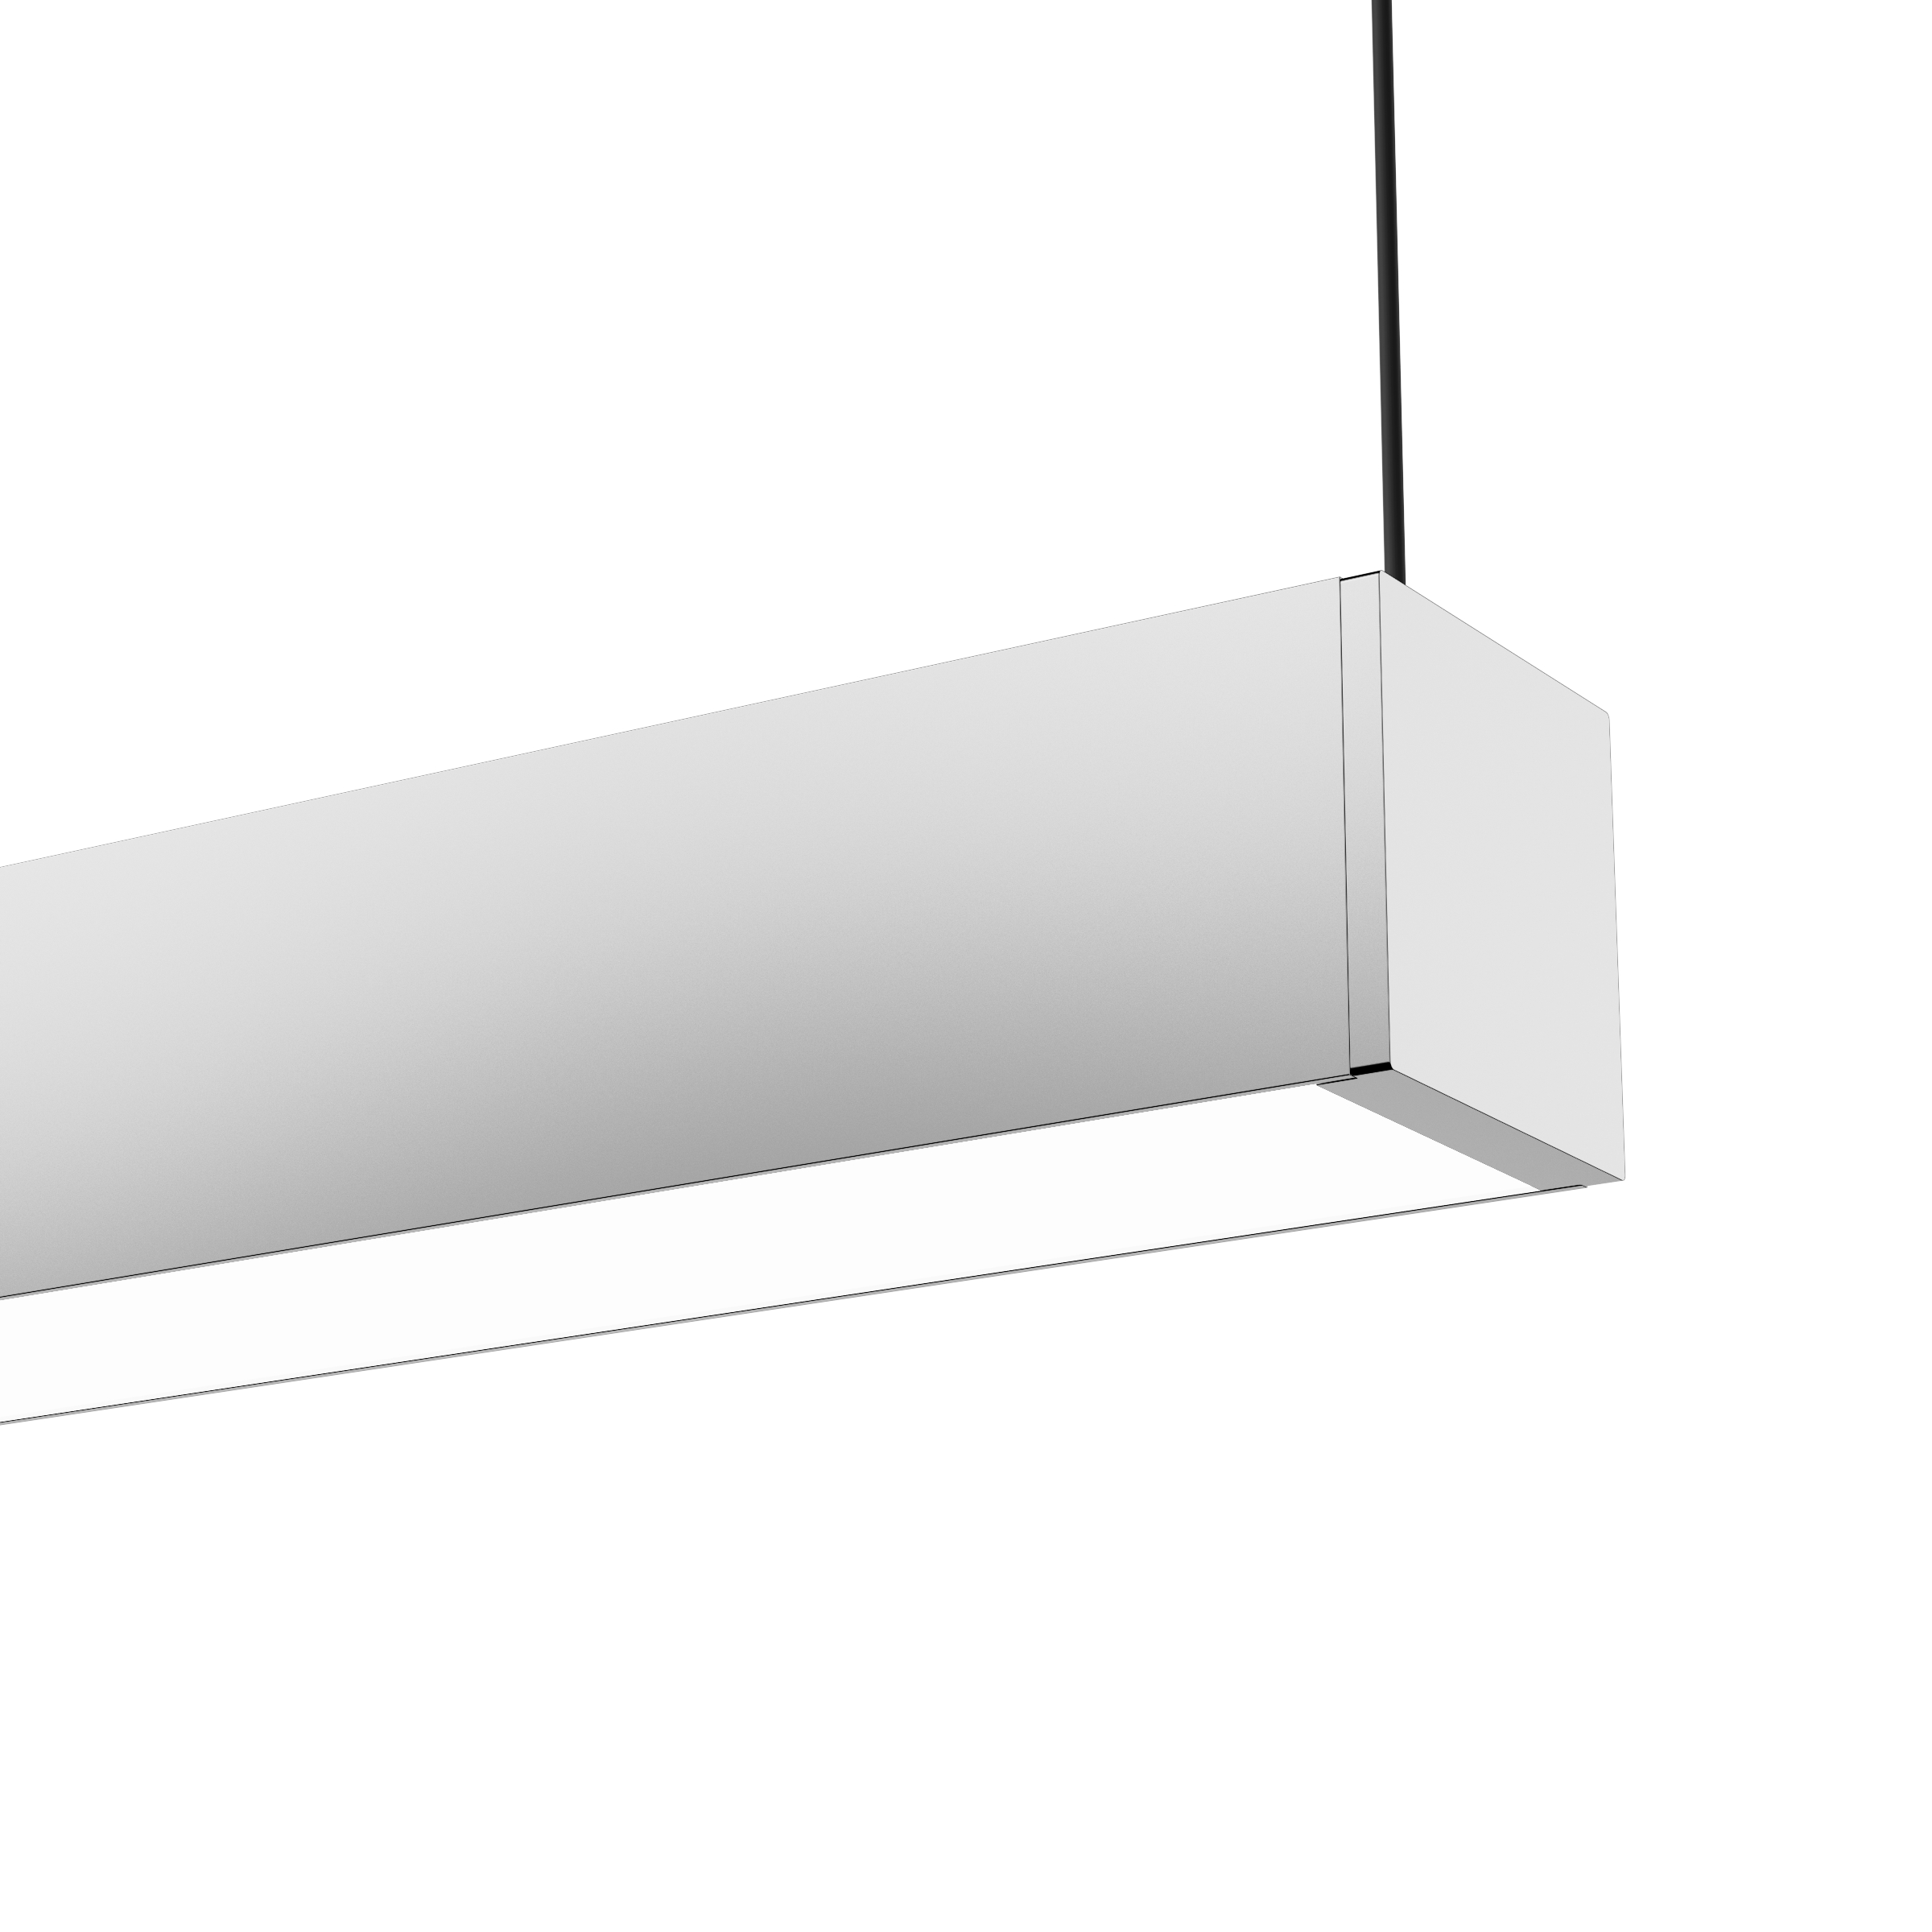 MICROSquare Pendant is a 1.4″ square suspended linear LED light fixture, bringing SmartBeam® capabilities to a scale designed to compliment architectural space. MICROSquare features a remote driver to remove visual bulk.